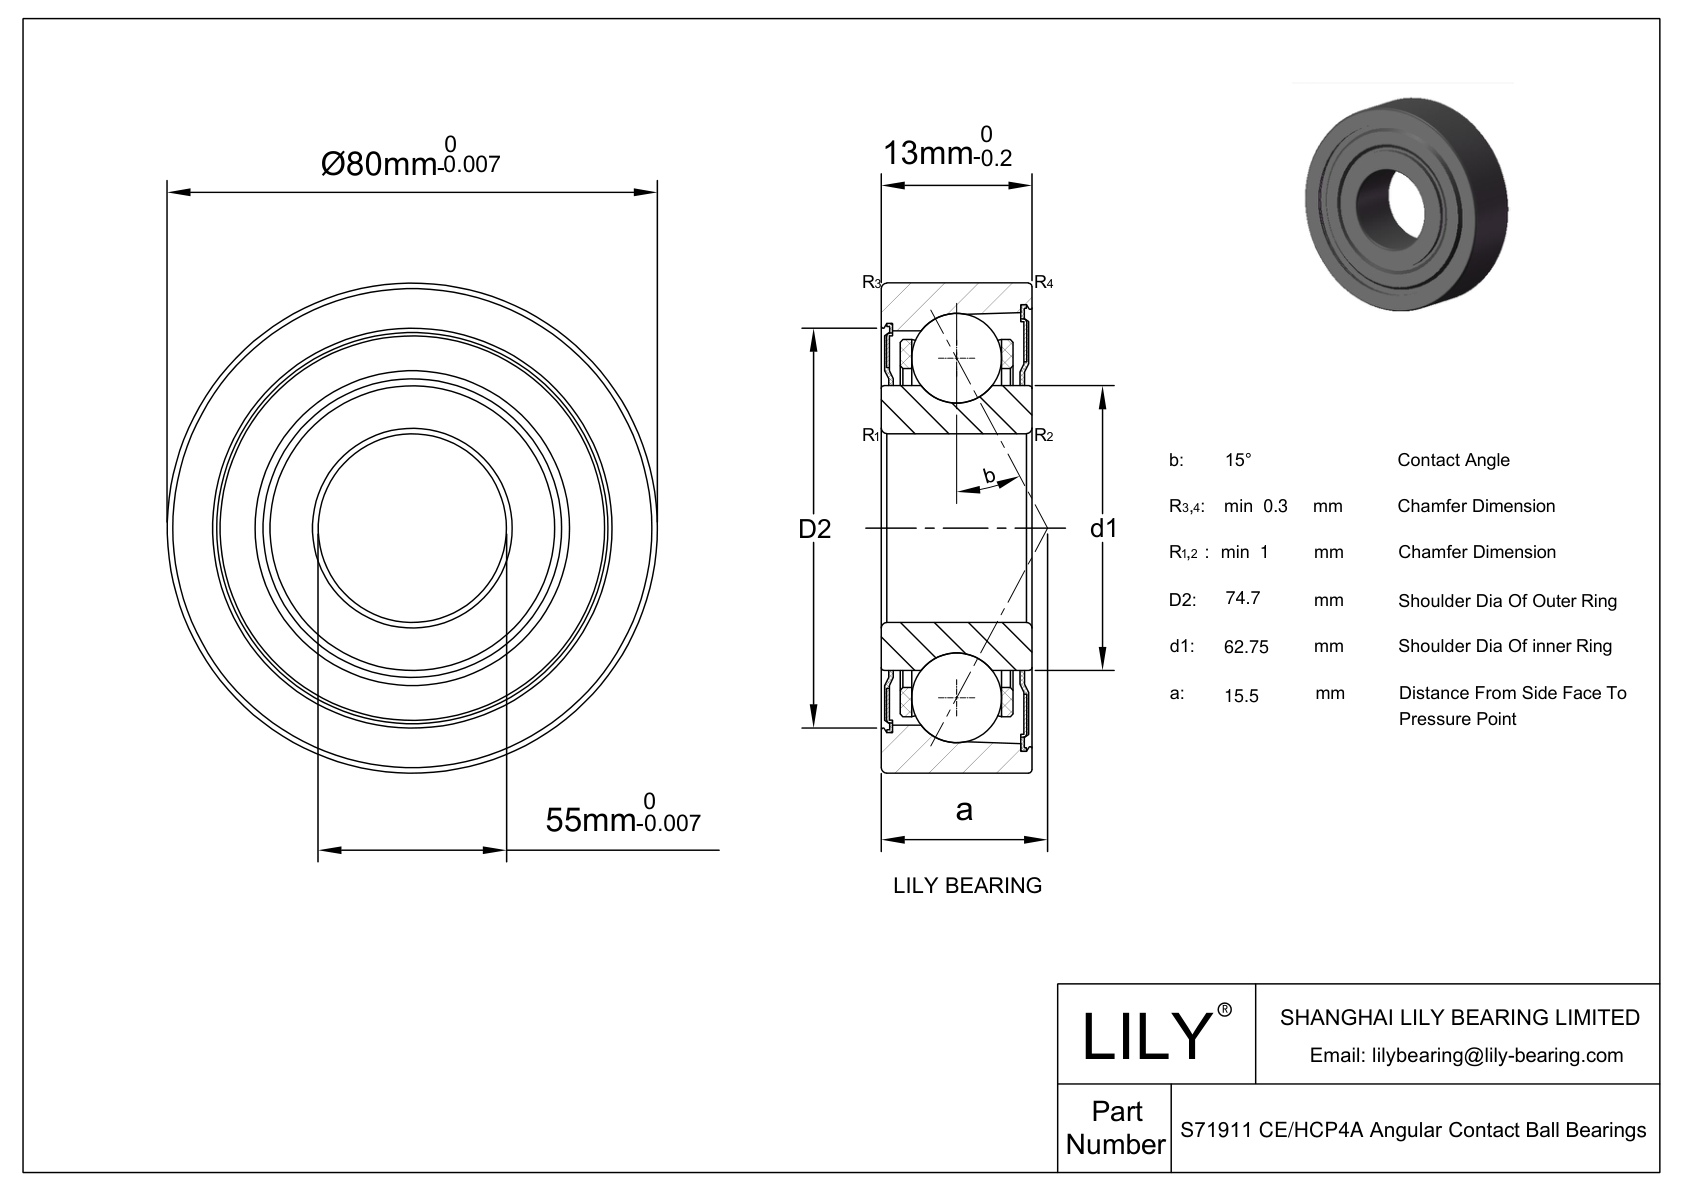 S71911 CE/HCP4A Super Precision Angular Contact Ball Bearings cad drawing